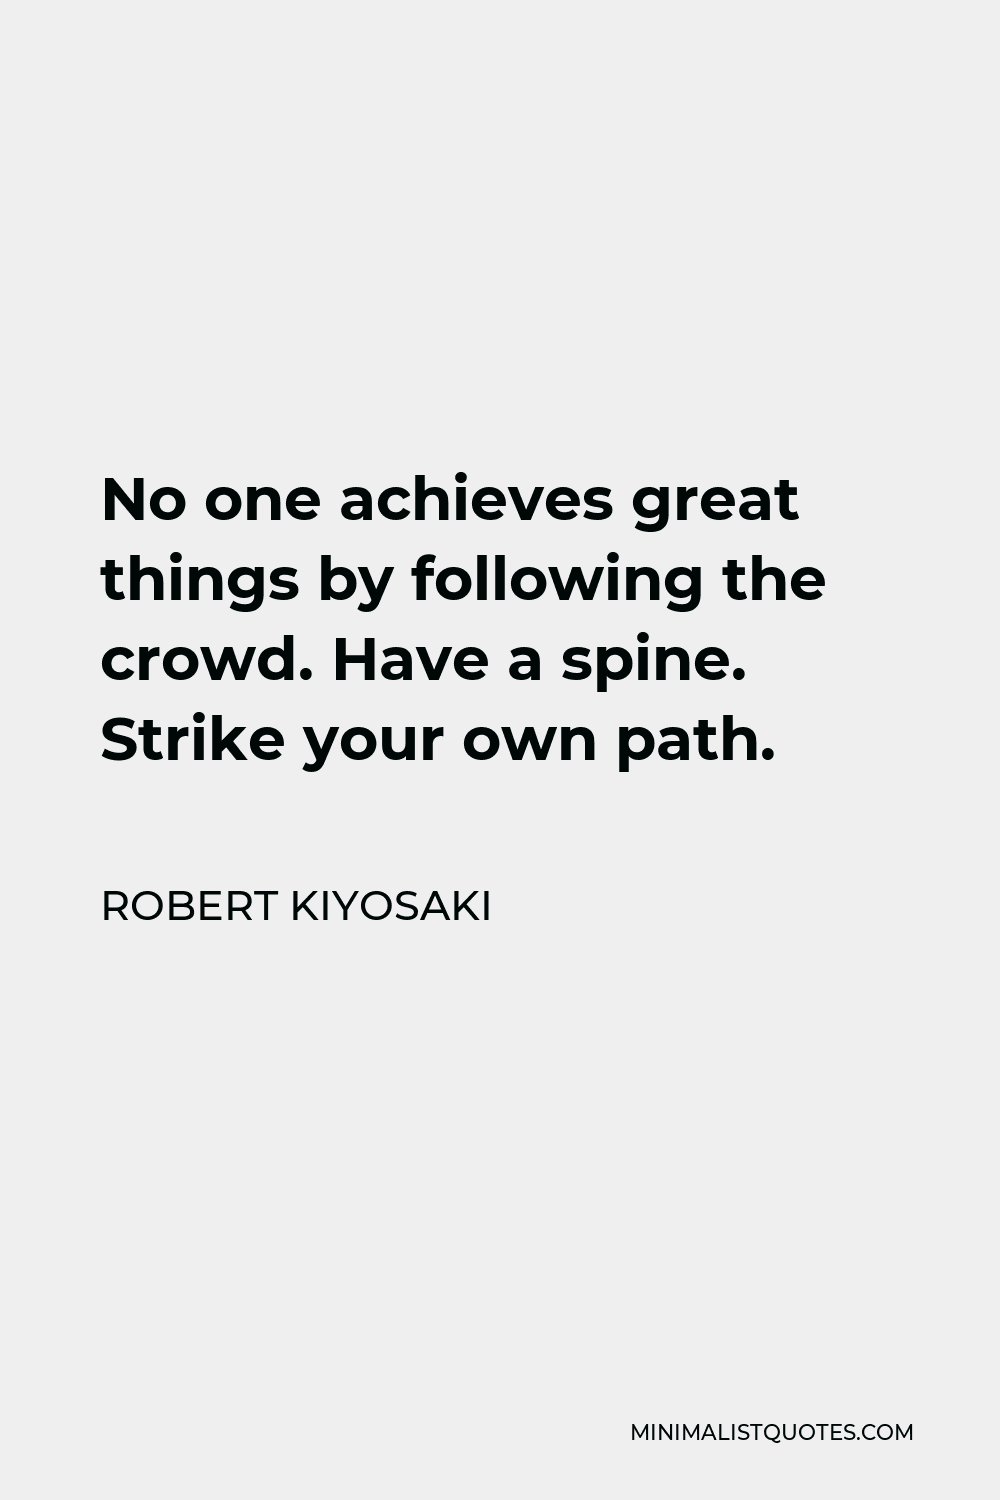 Robert Kiyosaki Quote - No one achieves great things by following the crowd. Have a spine. Strike your own path.